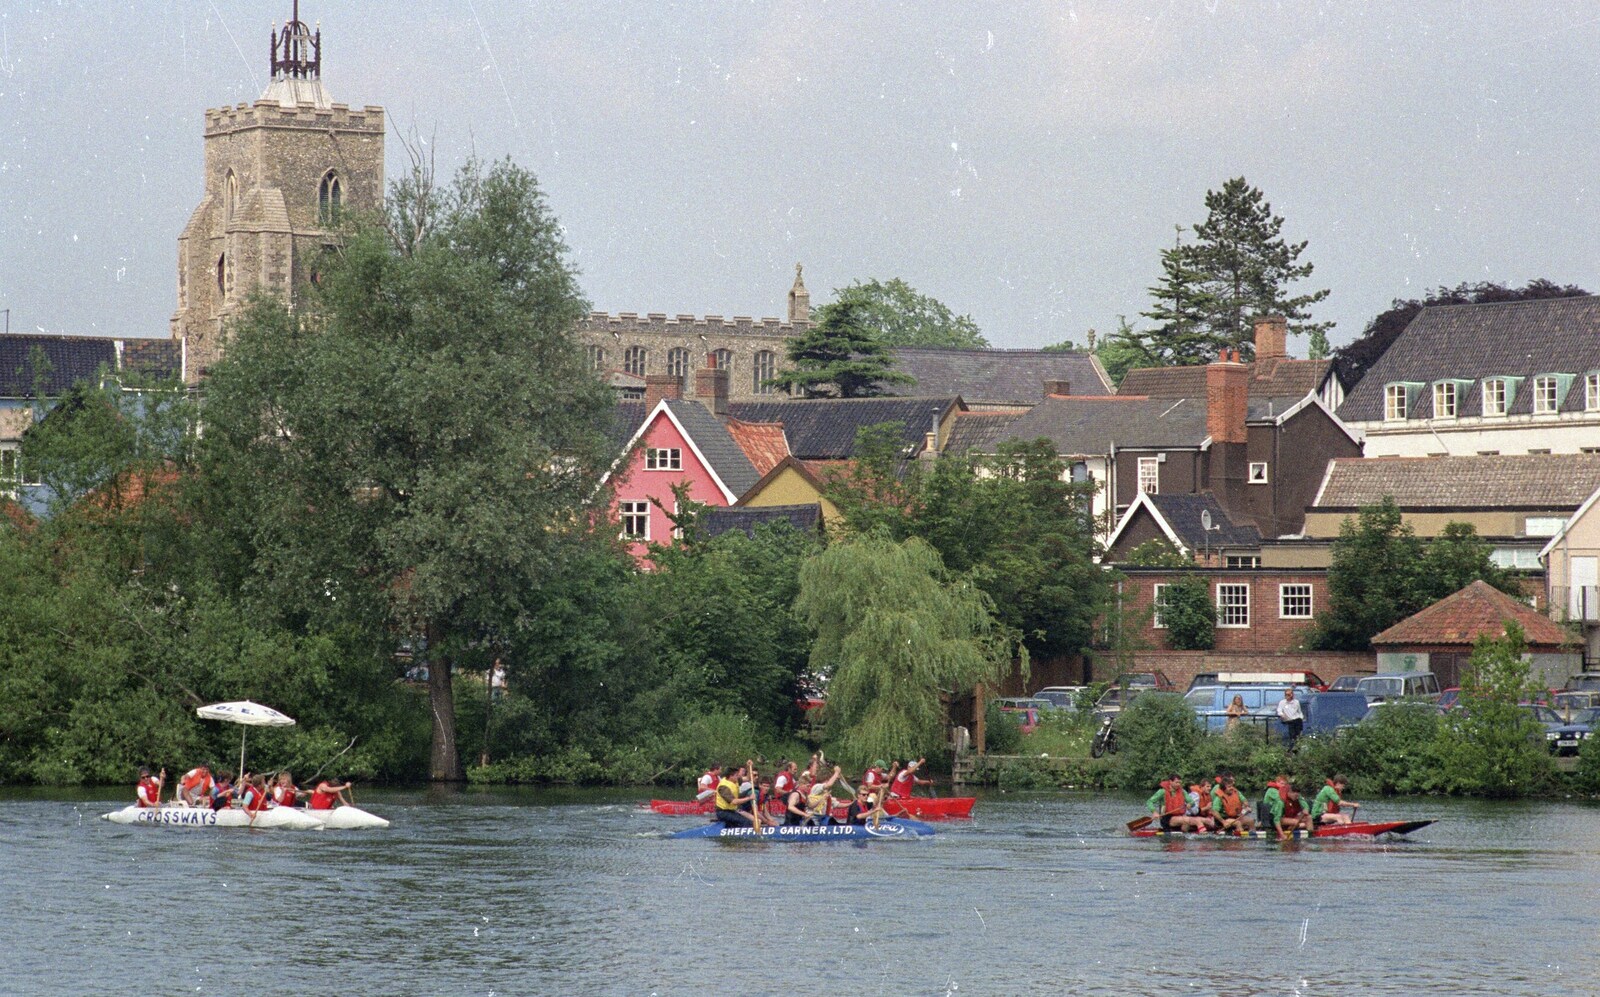 Rafts whizz around the Mere from A Raft Race on the Mere, Diss, Norfolk - 2nd June 1990